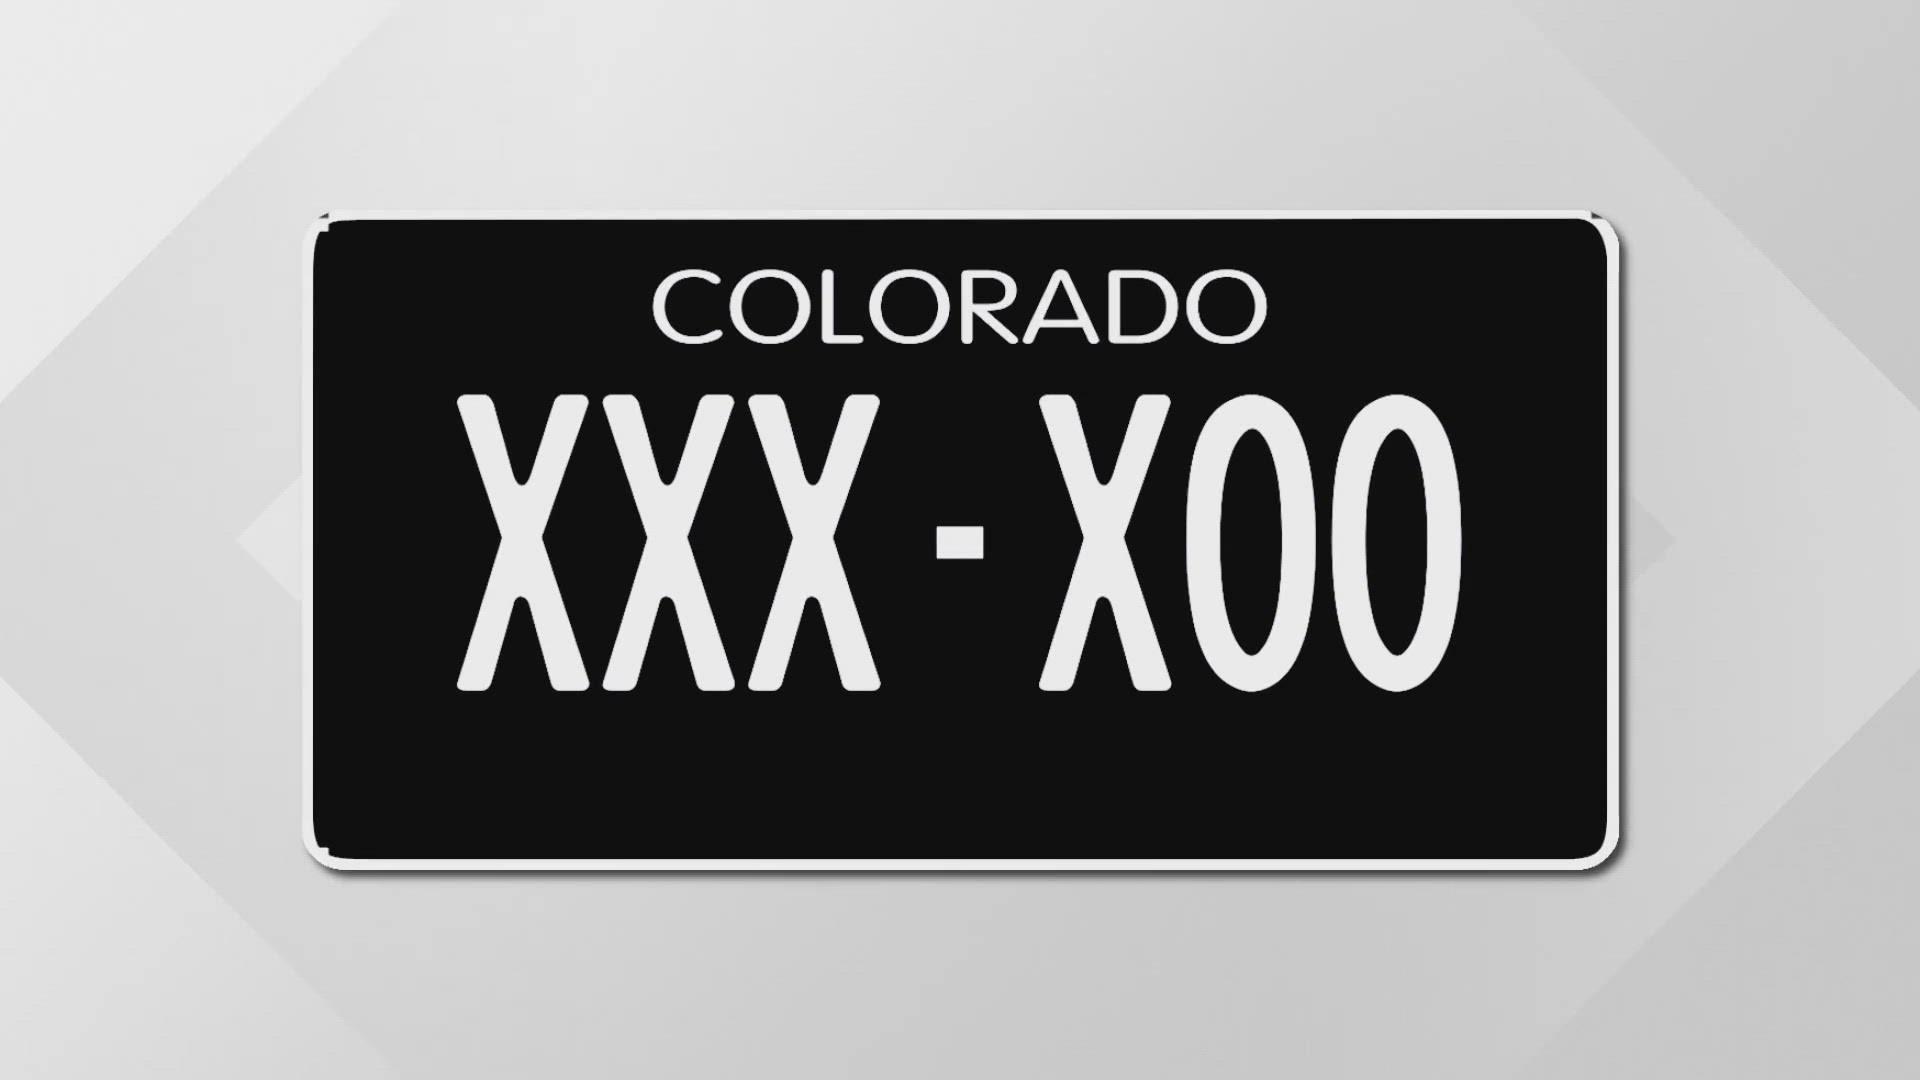 Coloradans revealed their interests, tastes and passions with the plates they chose last year.